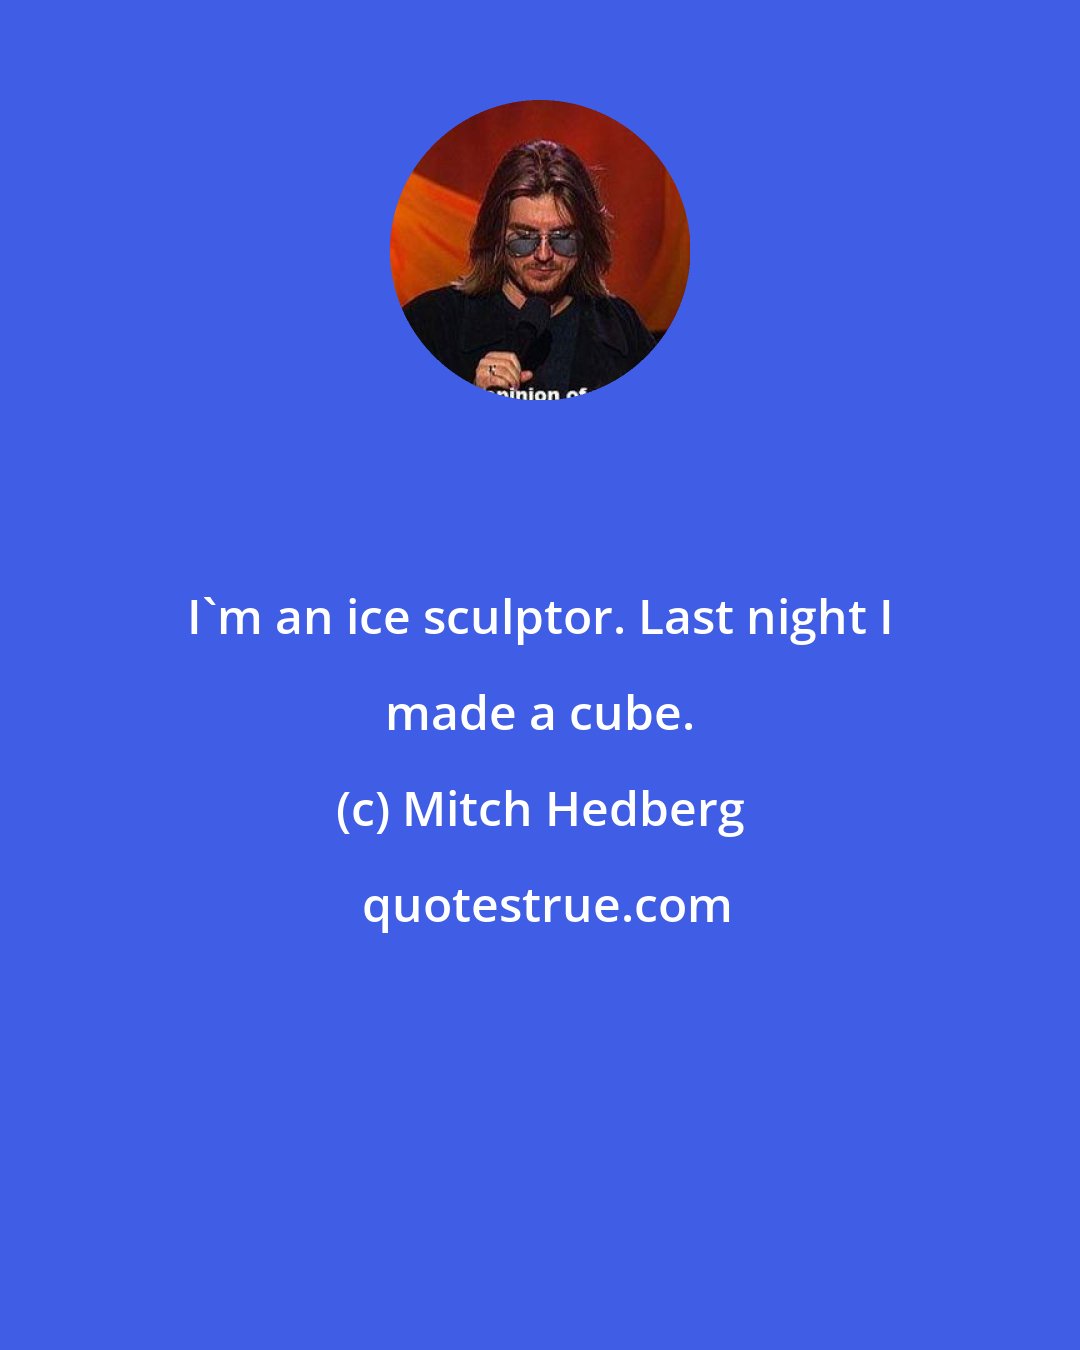 Mitch Hedberg: I'm an ice sculptor. Last night I made a cube.